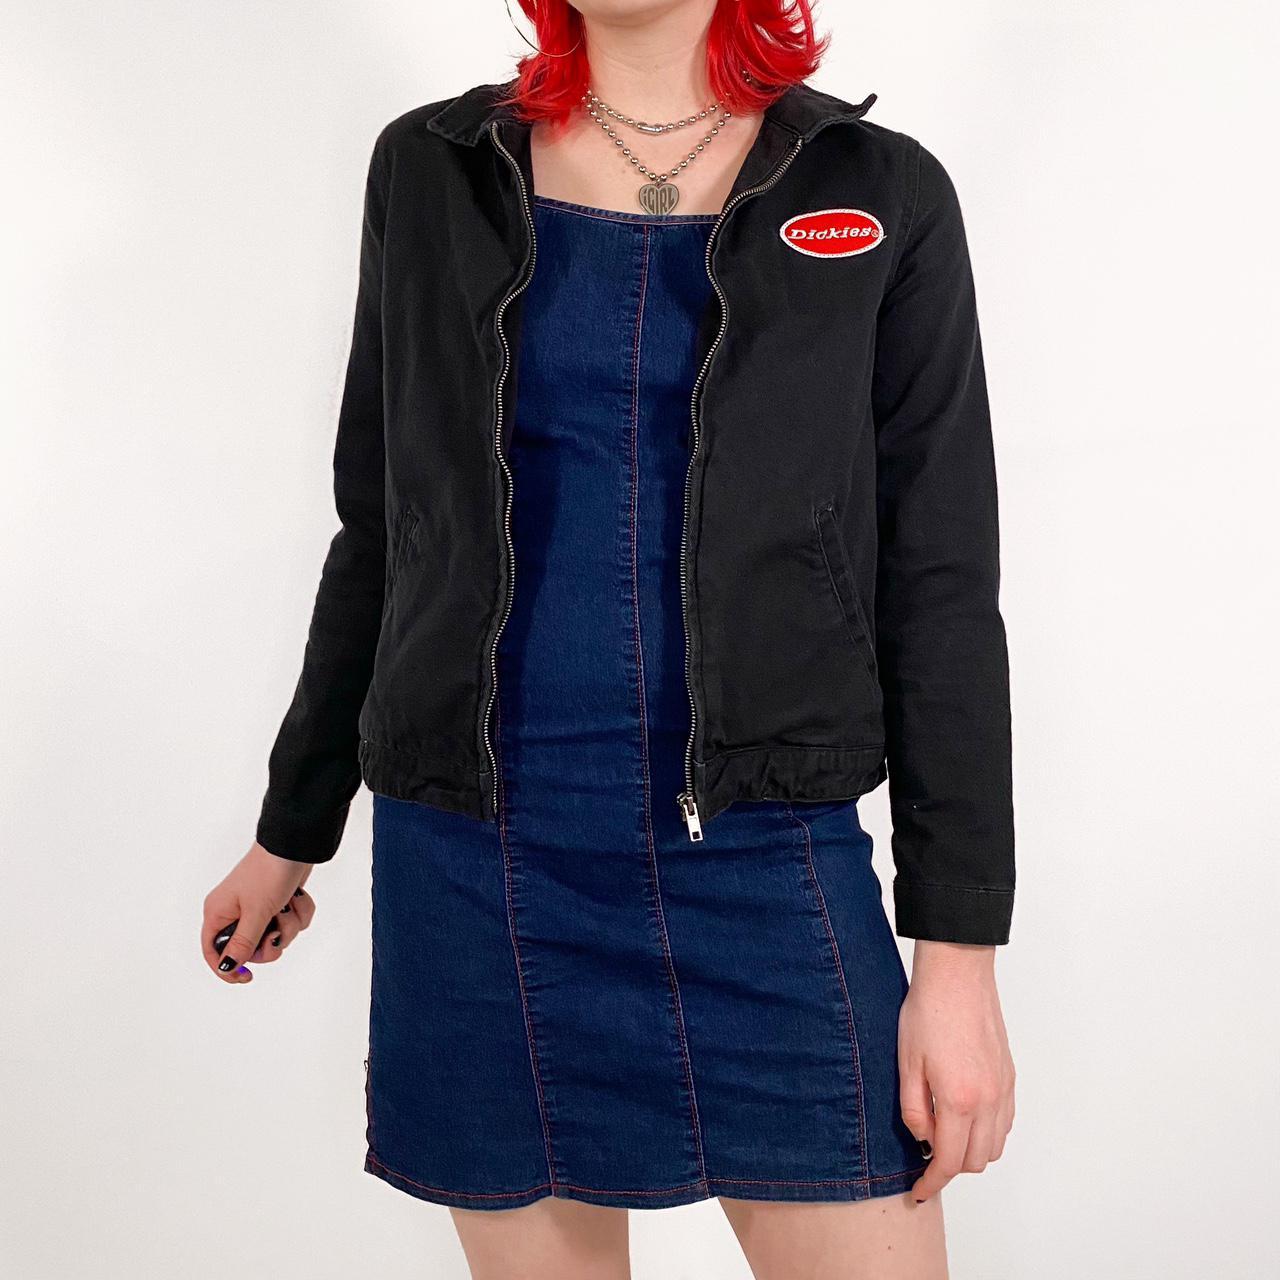 Dickies Women's Black and Red